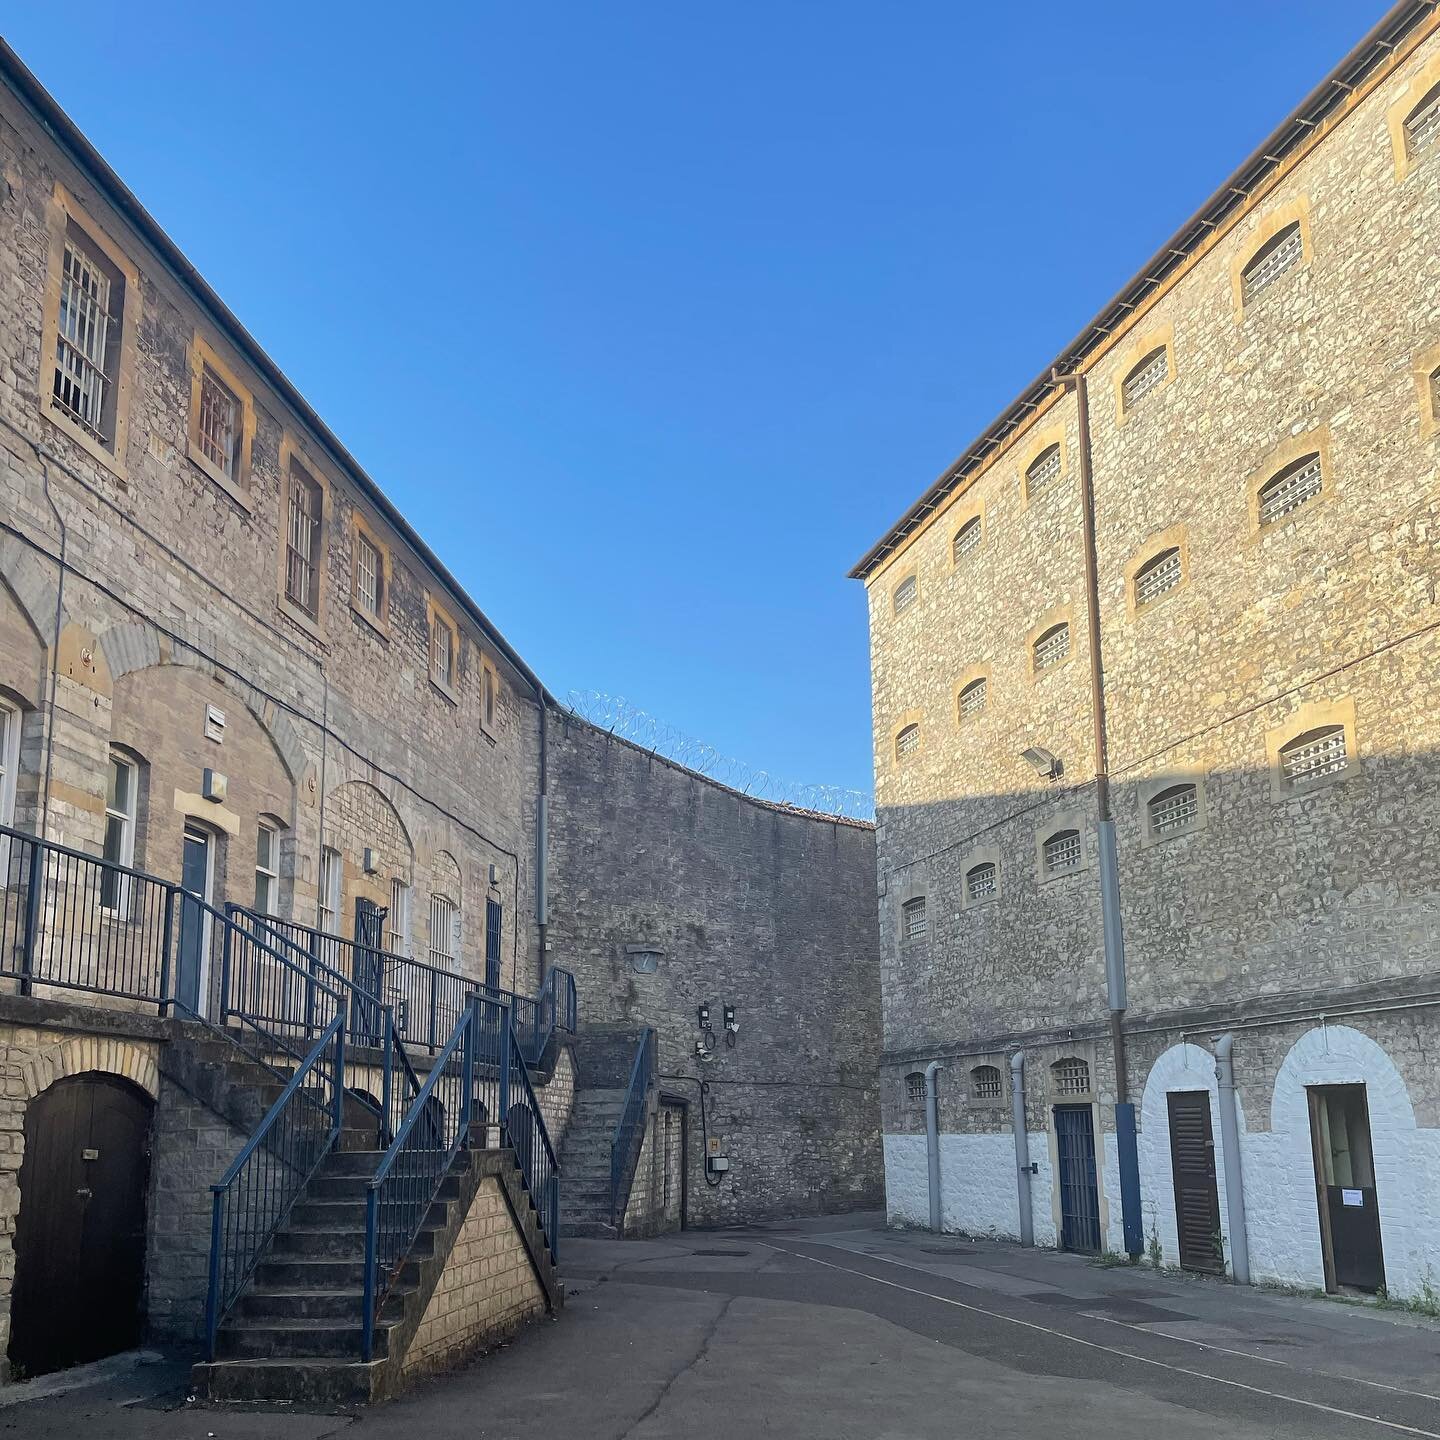 Another site visit looking at this beautiful prison in Shepton Mallet. Some really nice details on the buildings. The finding of the unmarked graves is quite fascinating. #staticdynamic #currentportfolio #historicbuilding #structuralengineering